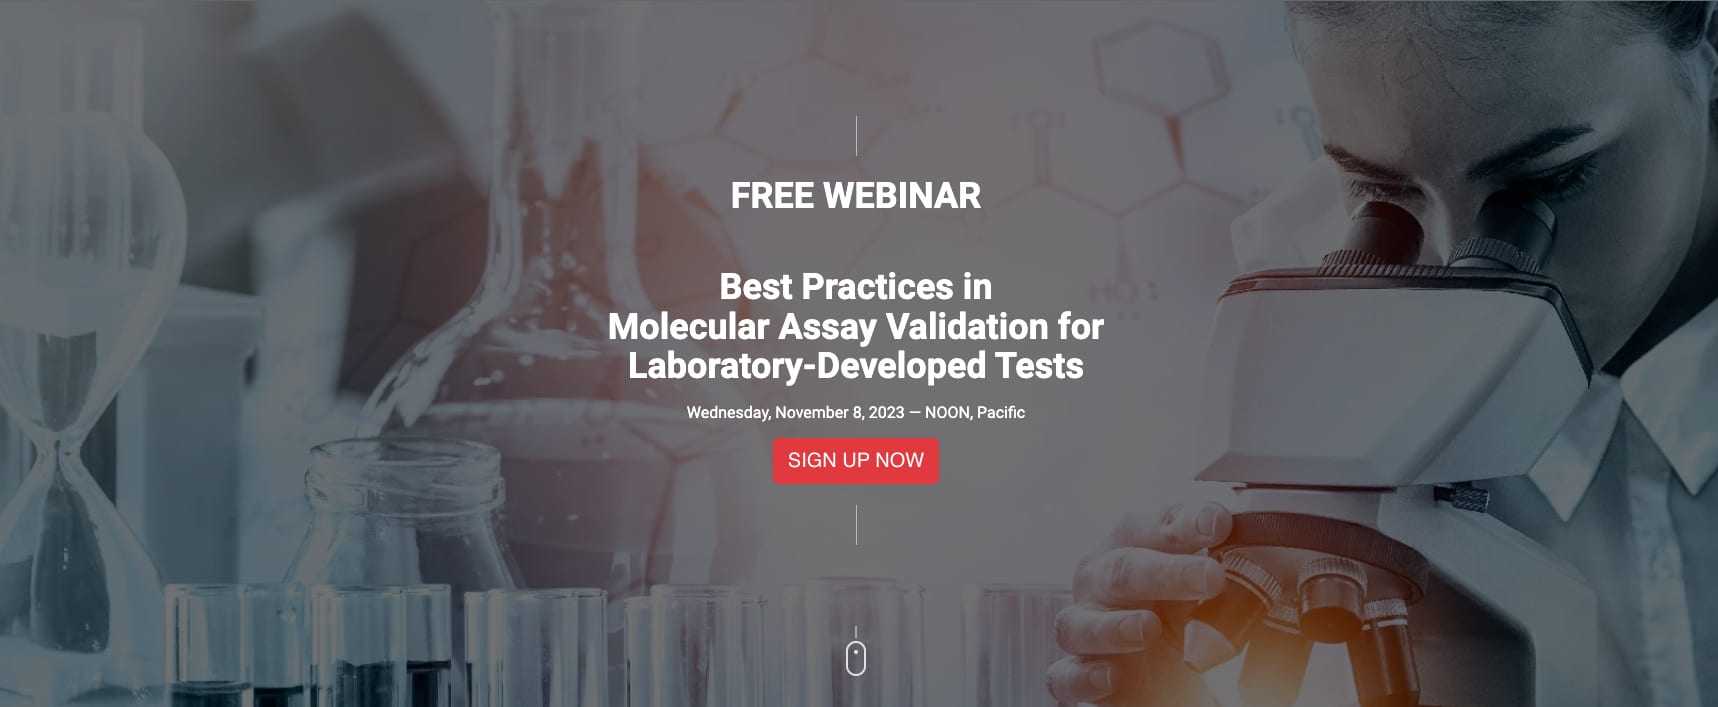 FREE WEBINAR Best Practices in Molecular Assay Validation for Laboratory-Developed Tests Wednesday, November 8, 2023 — NOON, Pacific